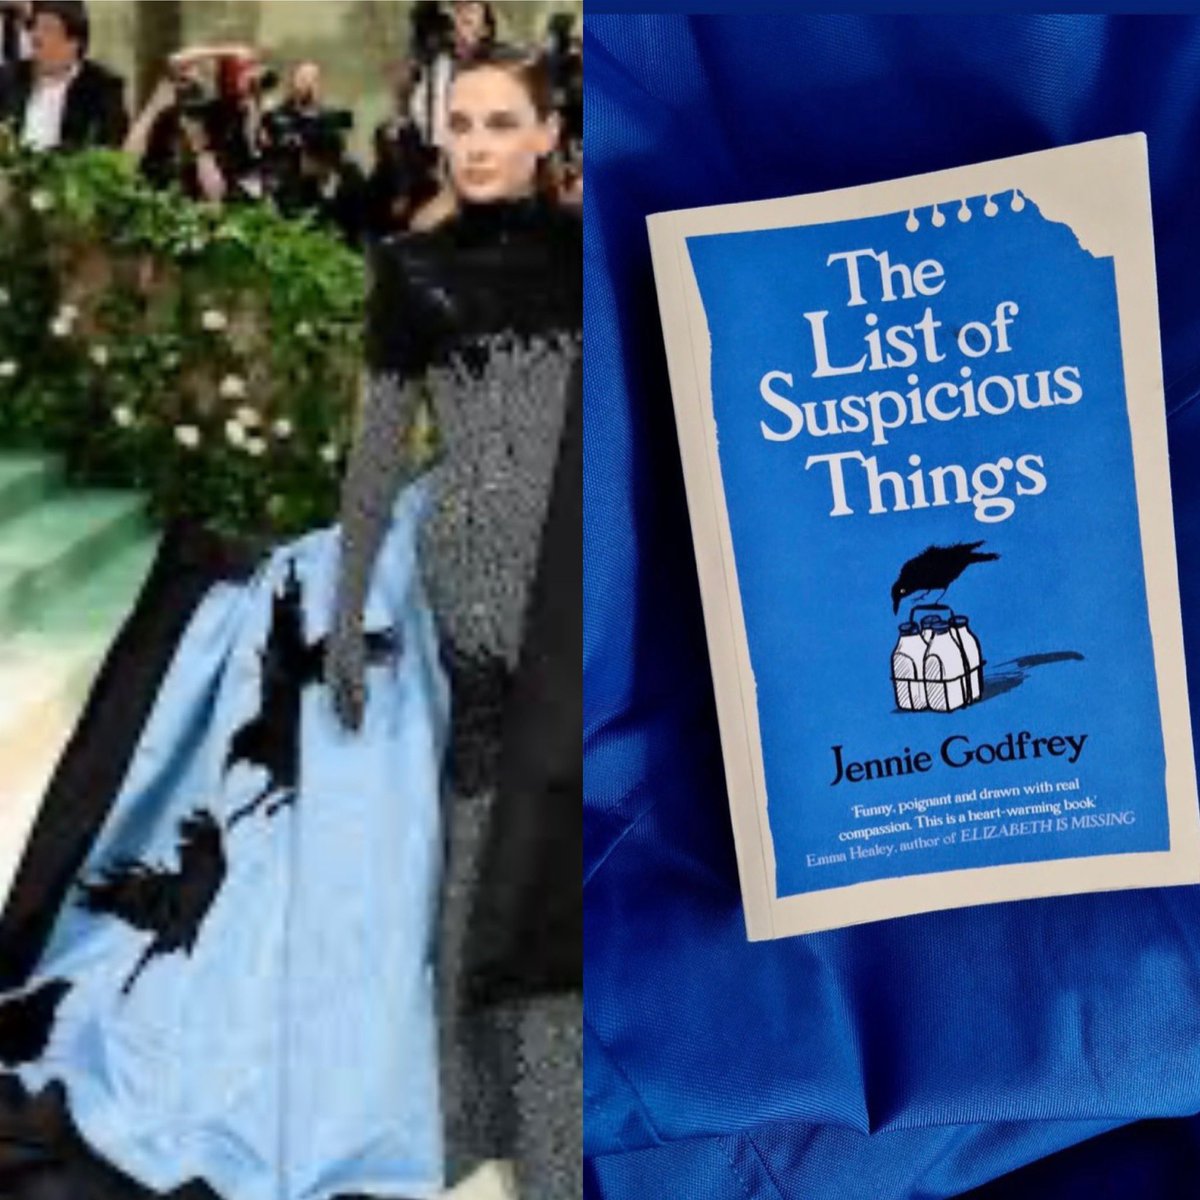 You can’t tell me that Rebecca Ferguson’s Met Gala outfit wasn’t totally inspired by #TheListofSuspiciousThings (thank you to April Doyle for pointing this out) #booktwitter #MetGala @Waterstones